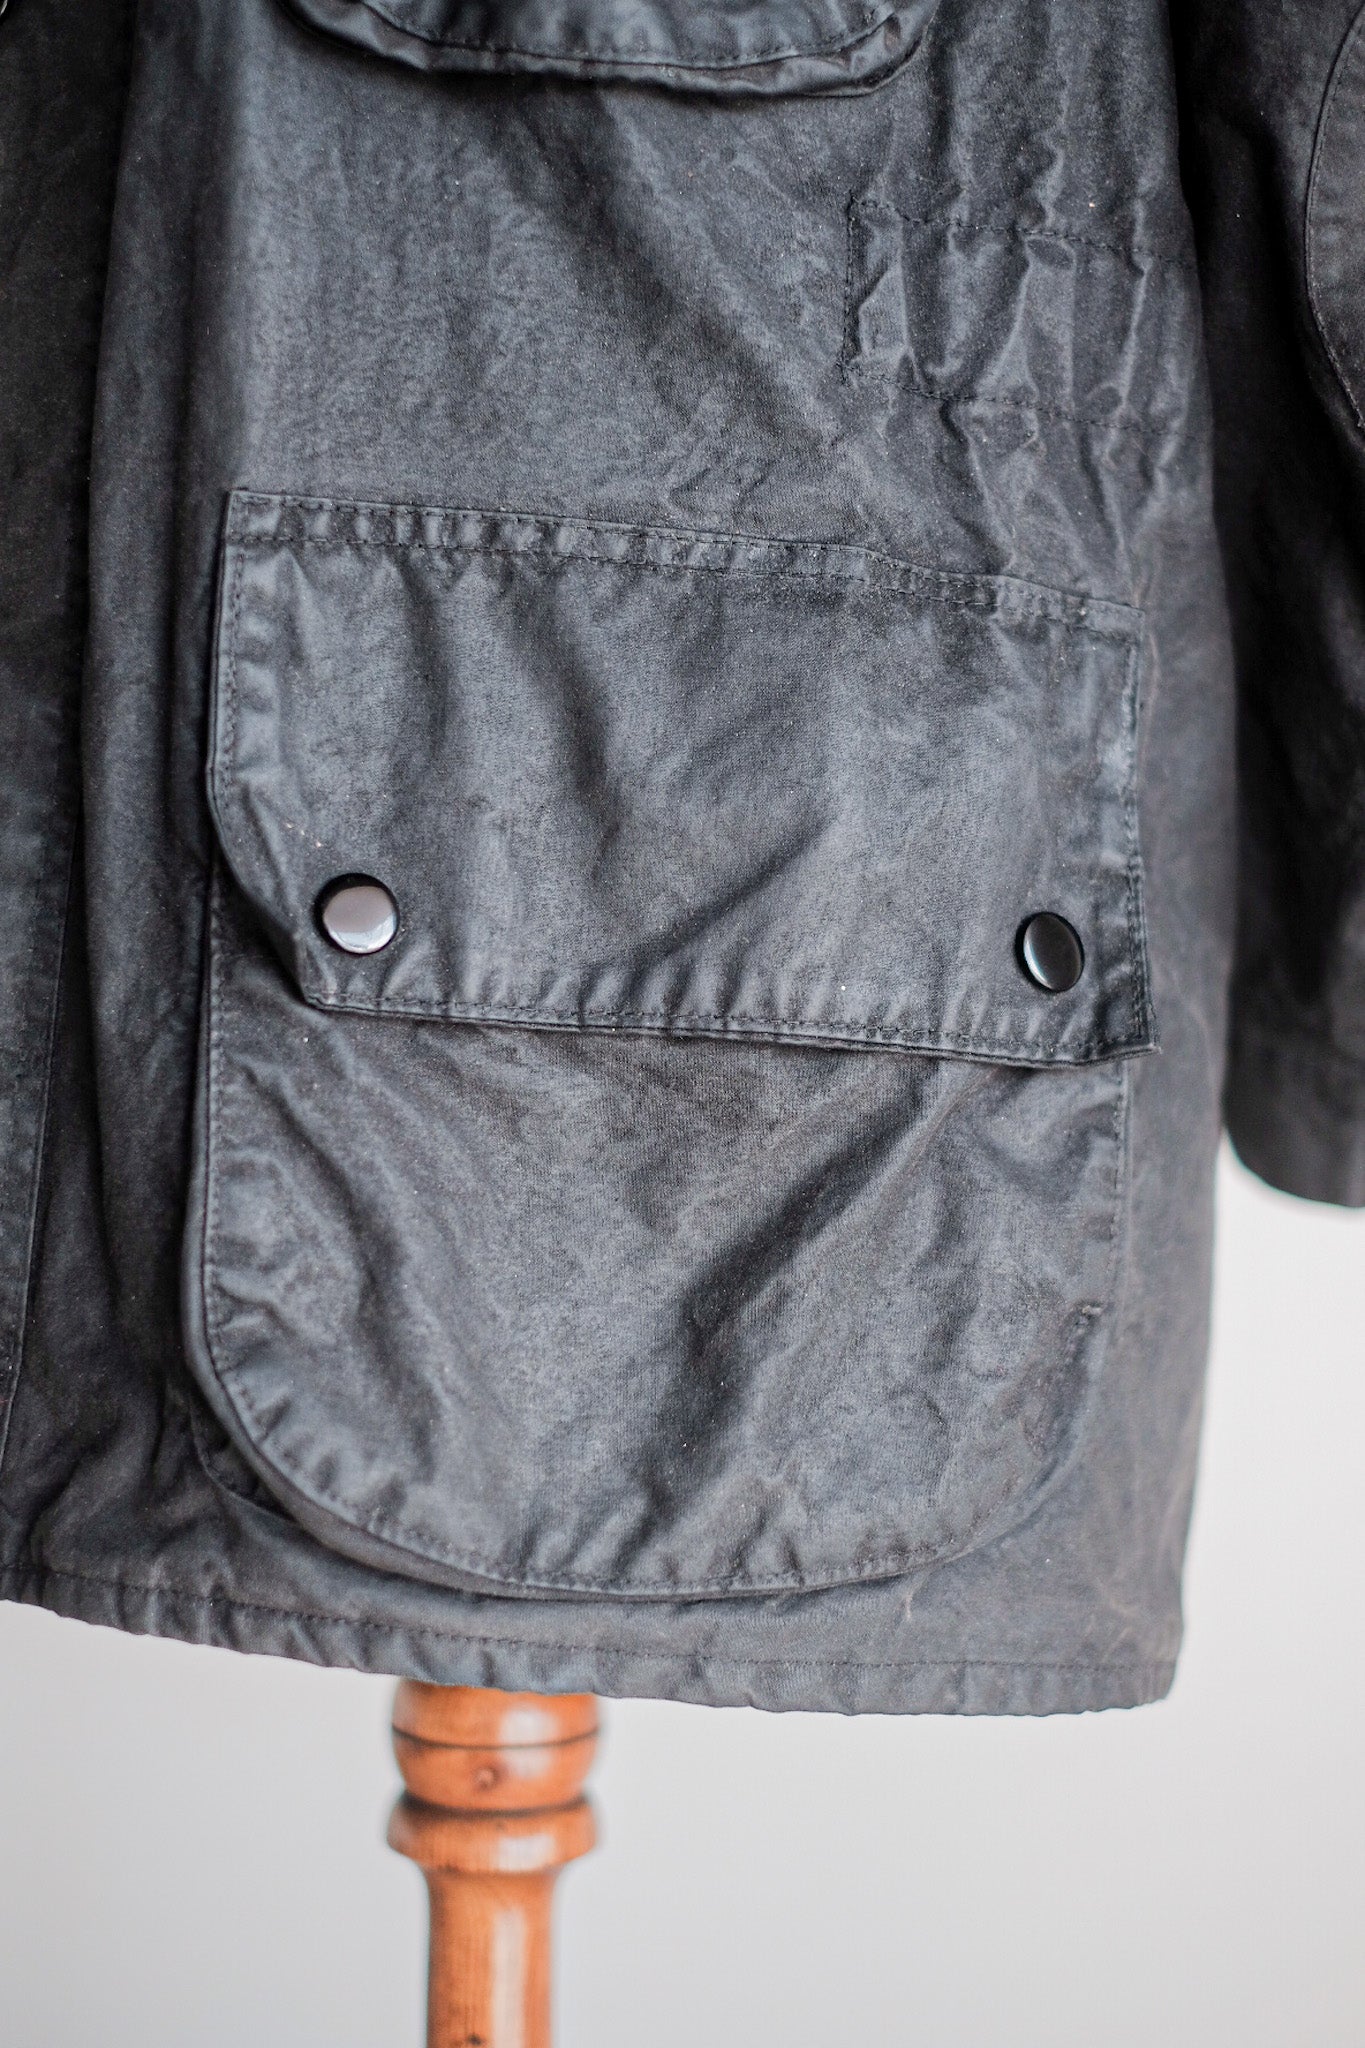 [~ 70's] Vintage Barbour Waxed Jacket "UNKNOWN MODEL" 1 CREST